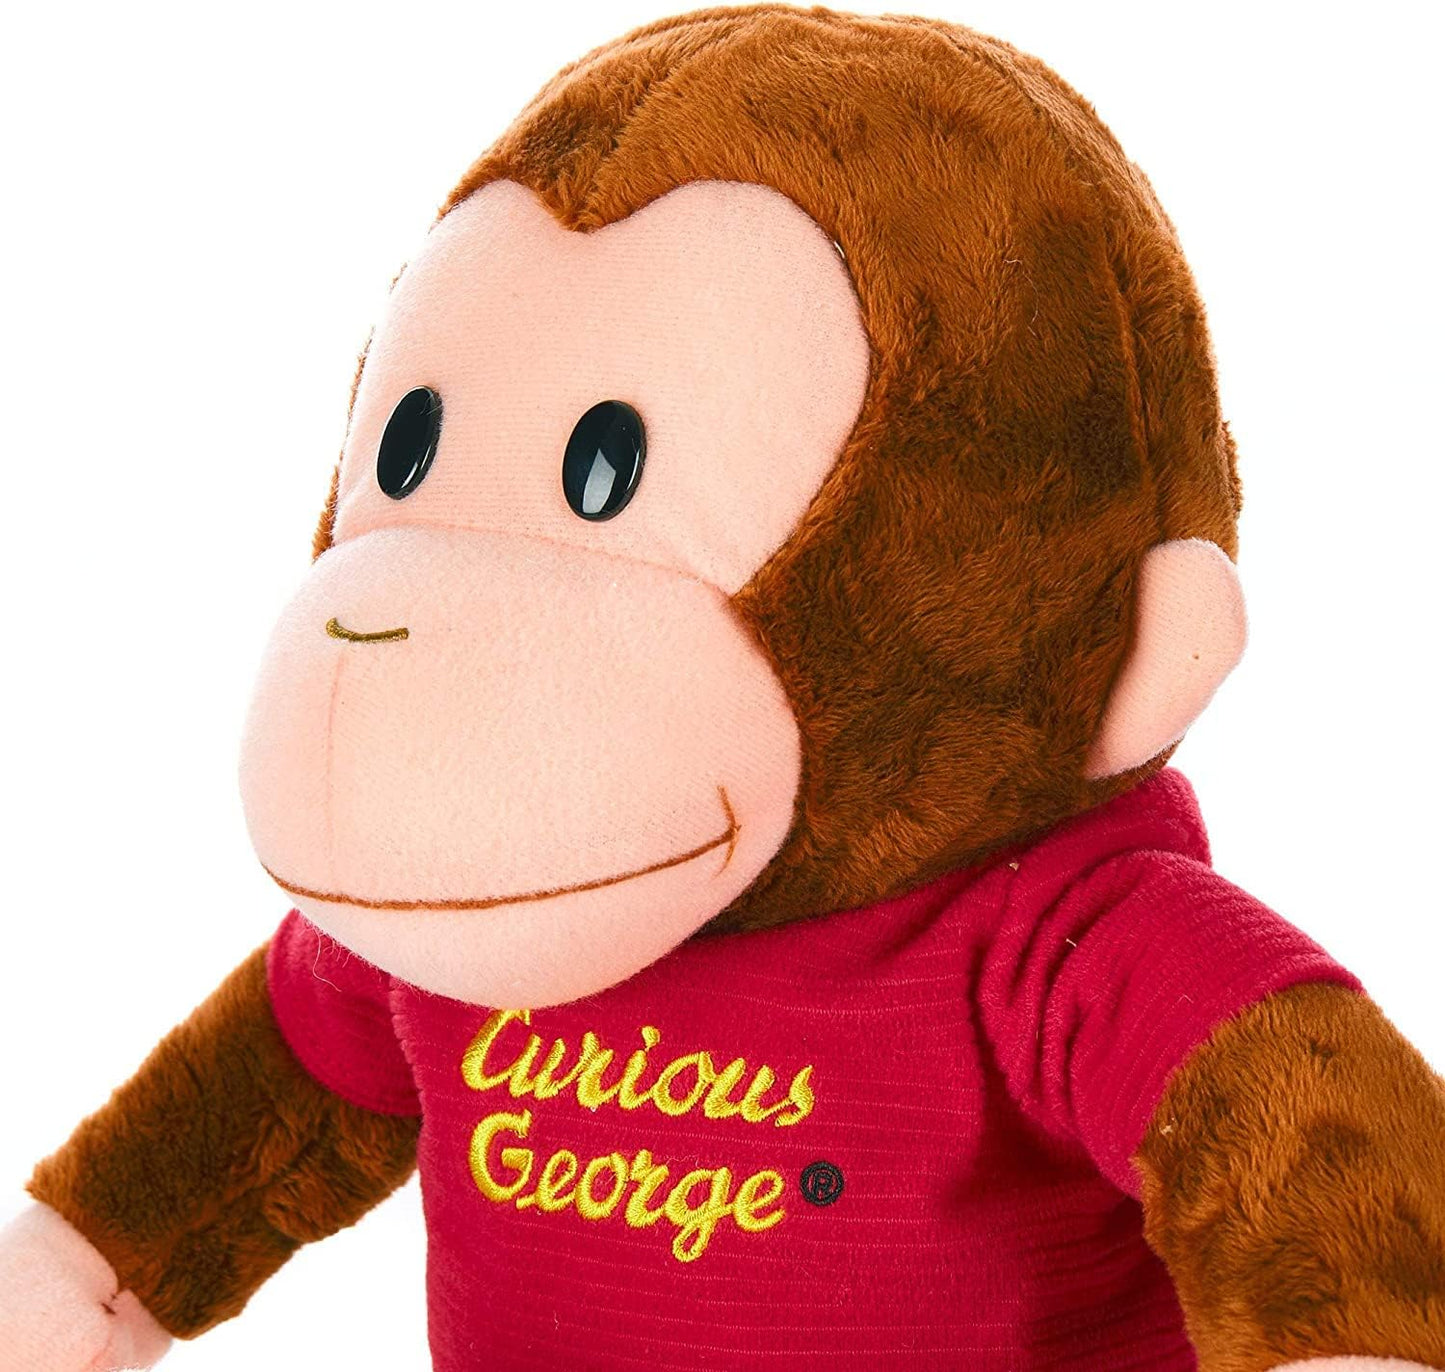 Curious George Gift Set with 8 Stories by H A Rey, Book Character Stuffed Animal Monkey, Musical Ice Cream Truck Playset Plush Toys and Gift Book Bag (Humorous Creative and Fun Educational Adventures)